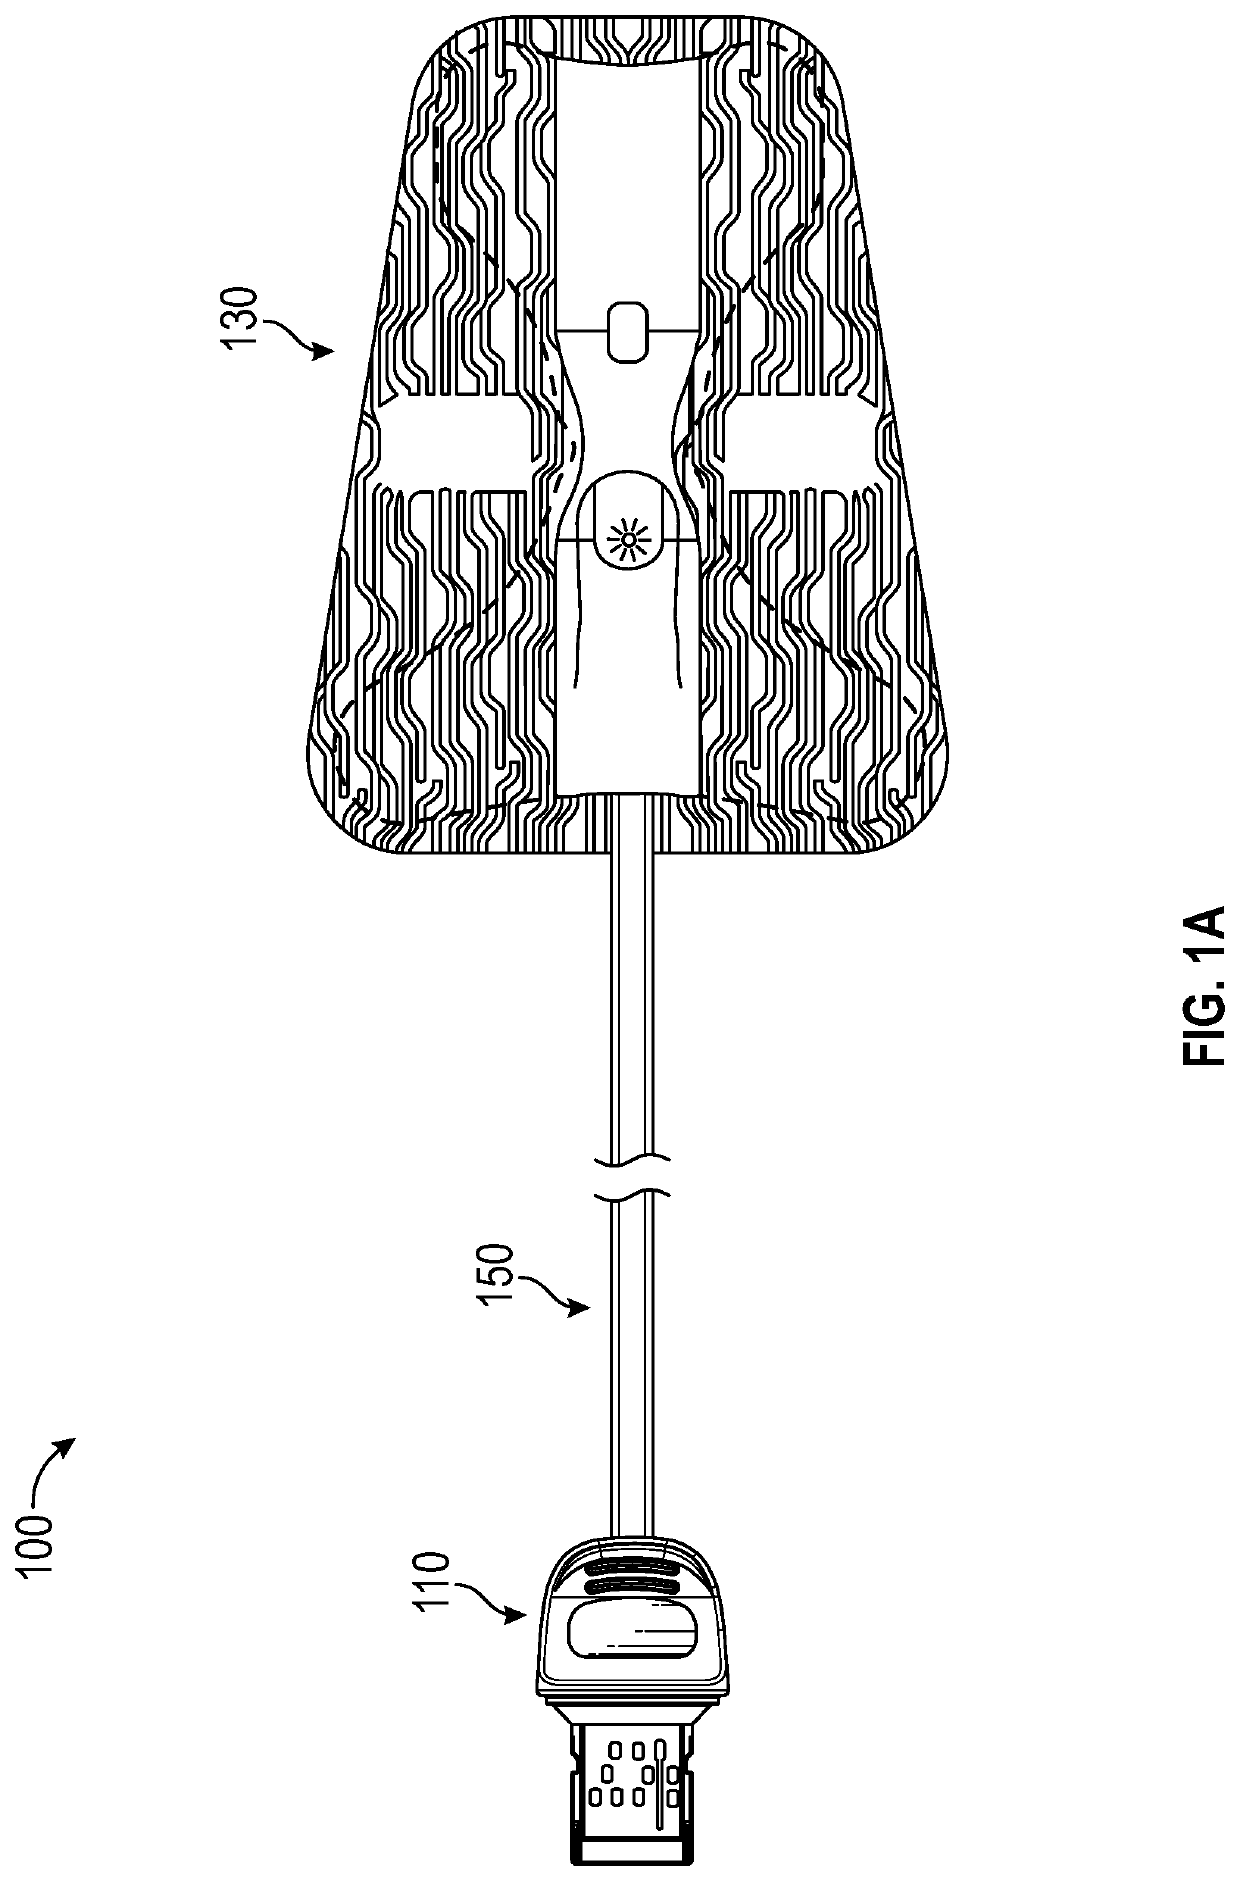 Patient connector assembly with vertical detents